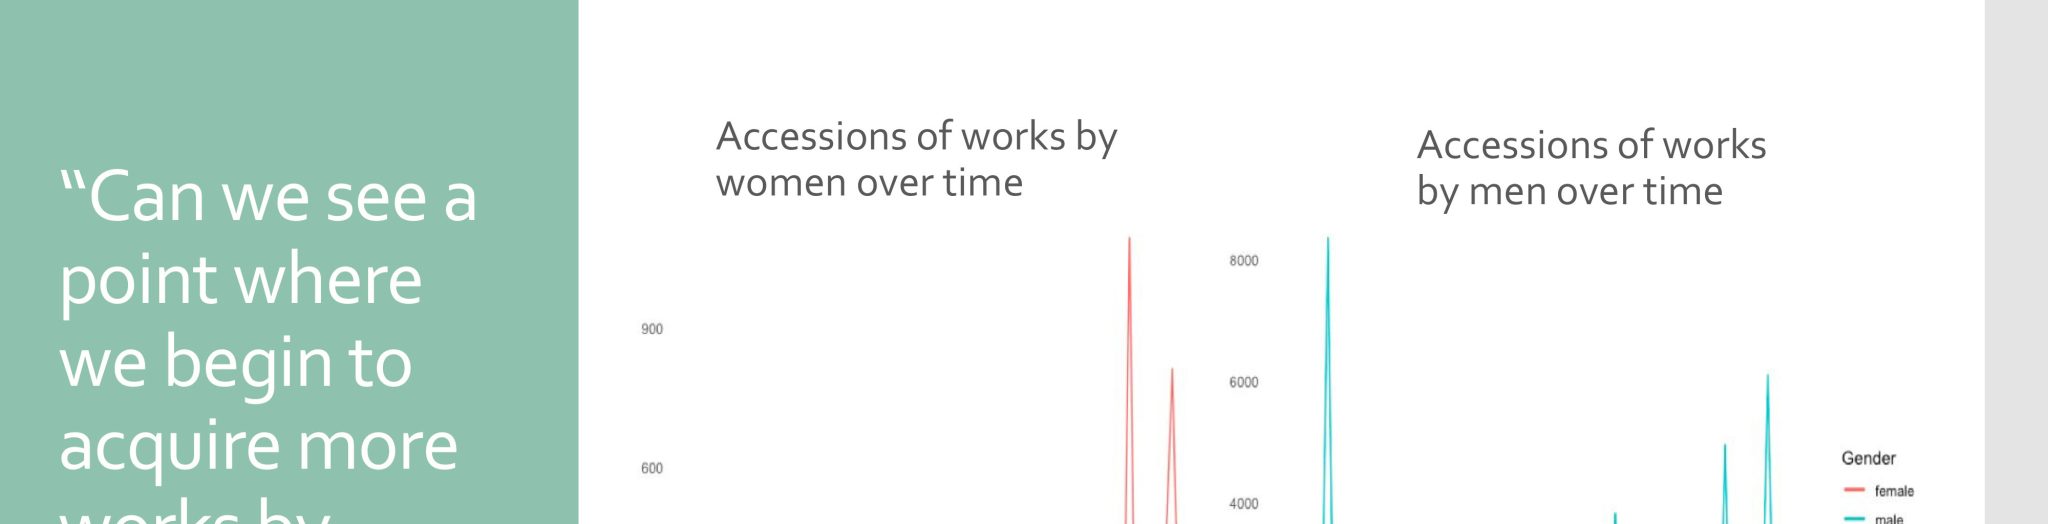 A slide reading "Can we see a point where we begin to acquire more works by women artists," with graphs that compare accessions of works by women over time to those by men